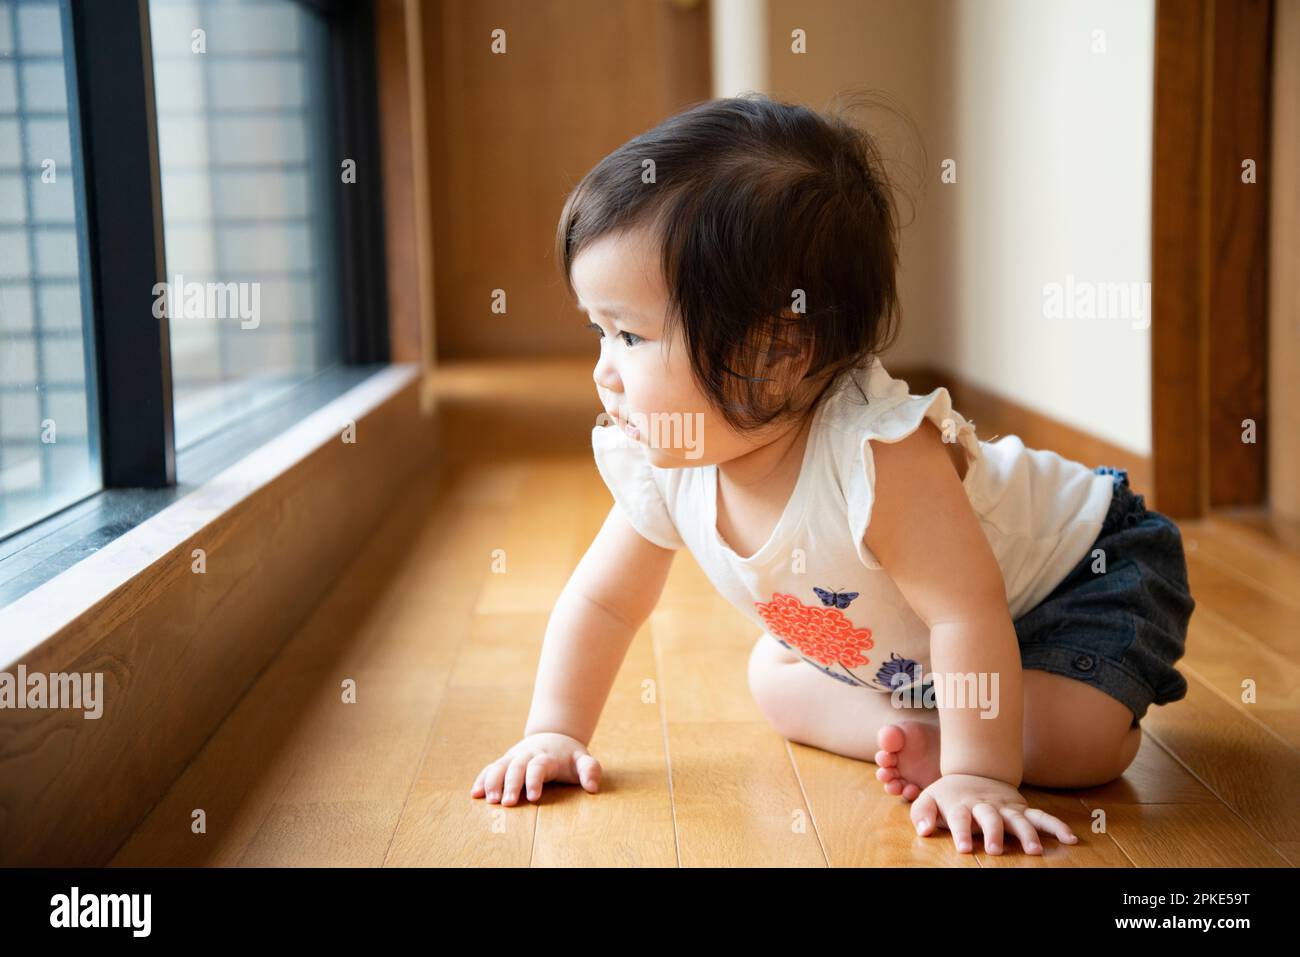 Baby crawling on the flooring Stock Photo